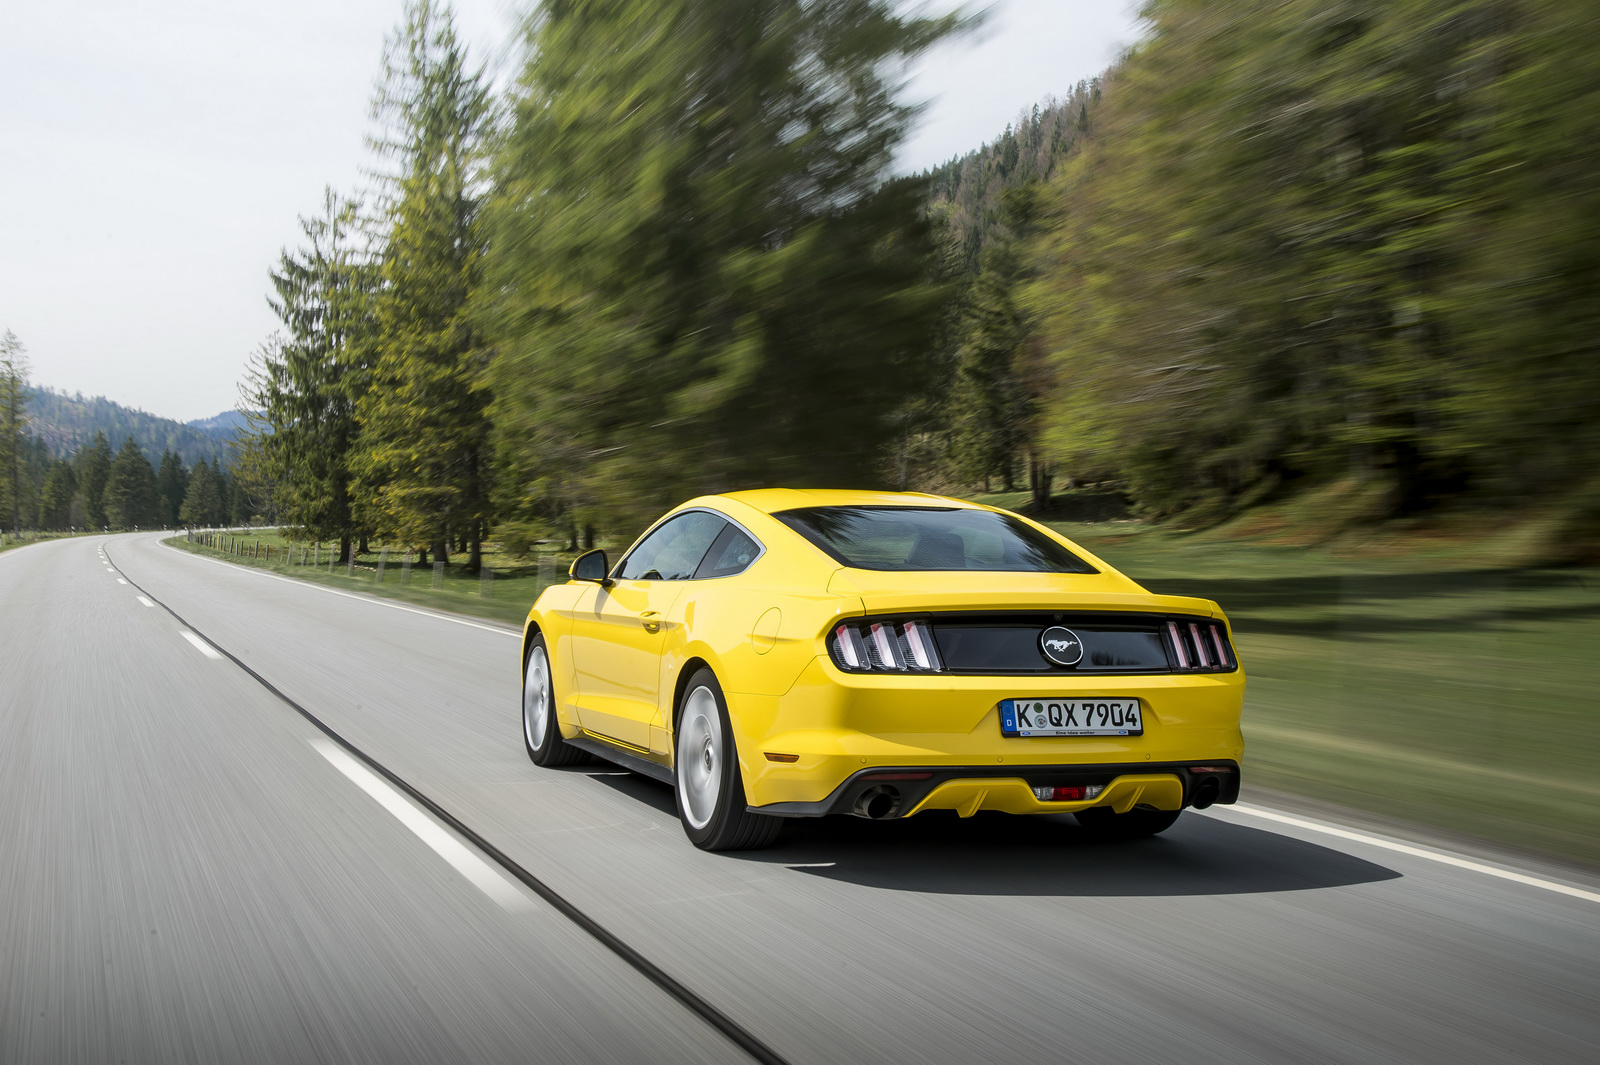 Facelifted Ford Mustang to Host 10-speed Automatic Gearbox Option